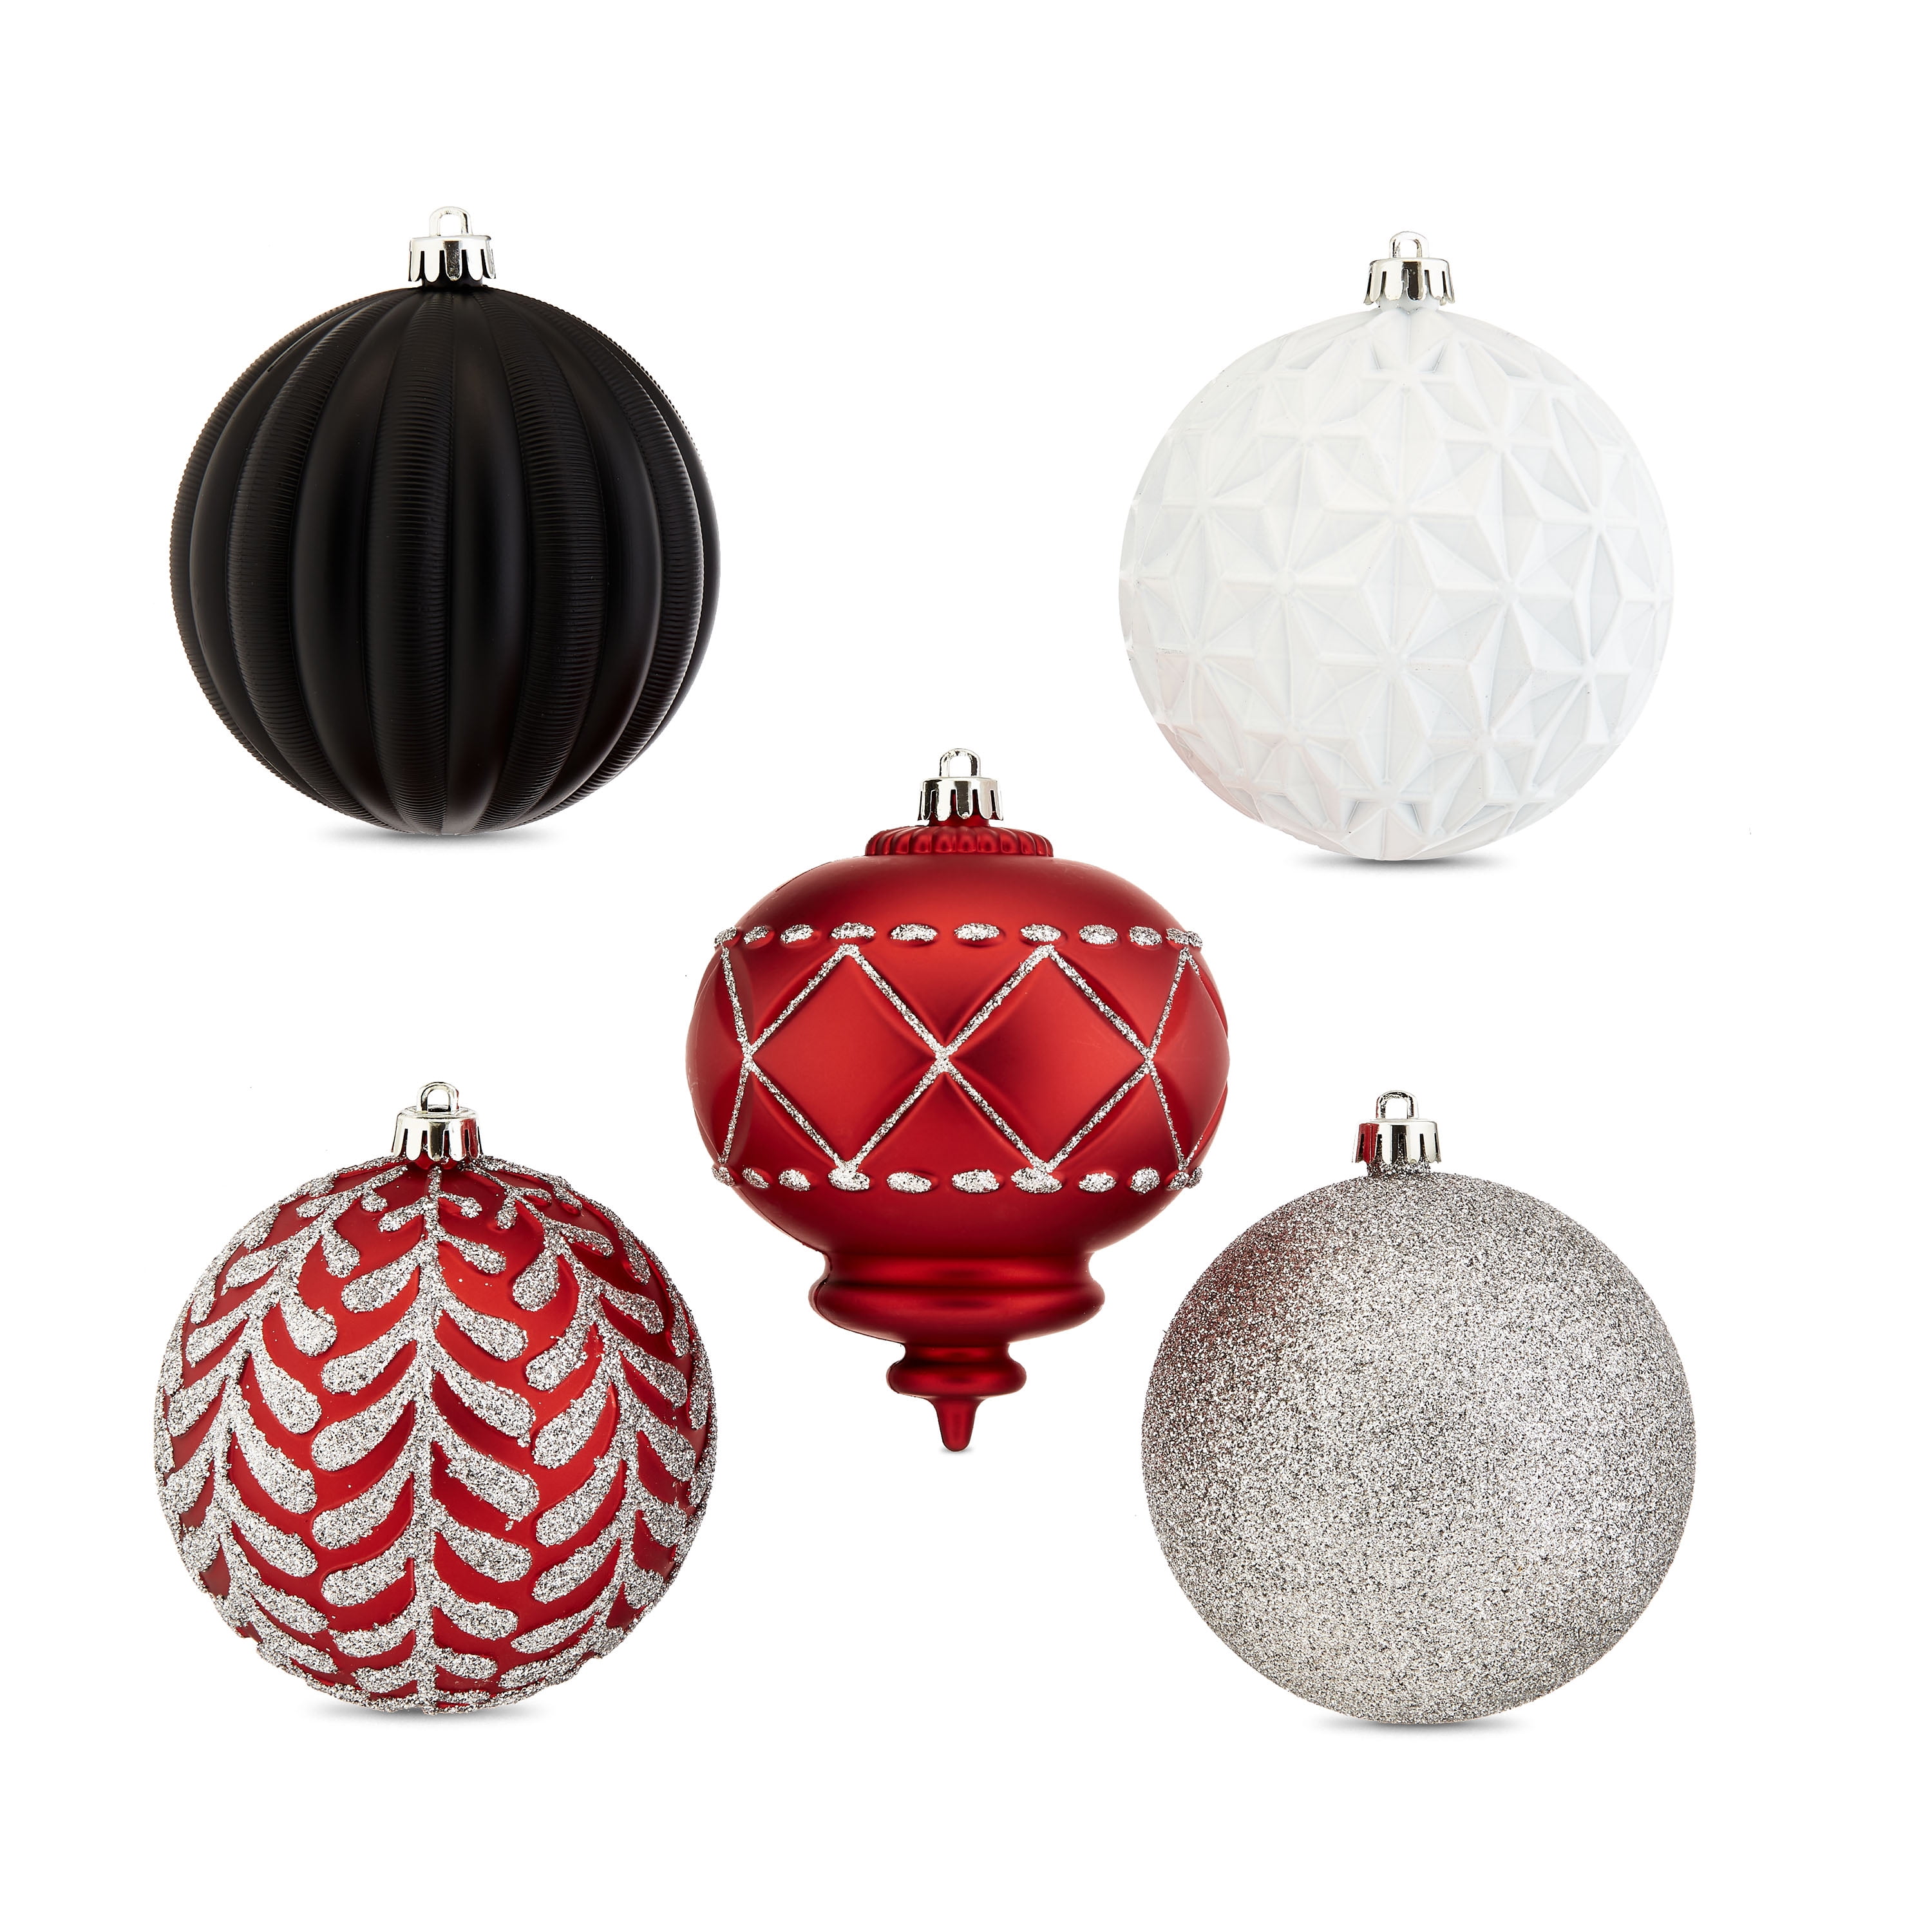 Holiday Time 100 mm Shatterproof Christmas Ornaments, Red, White, Black, and Silver, 9 Count